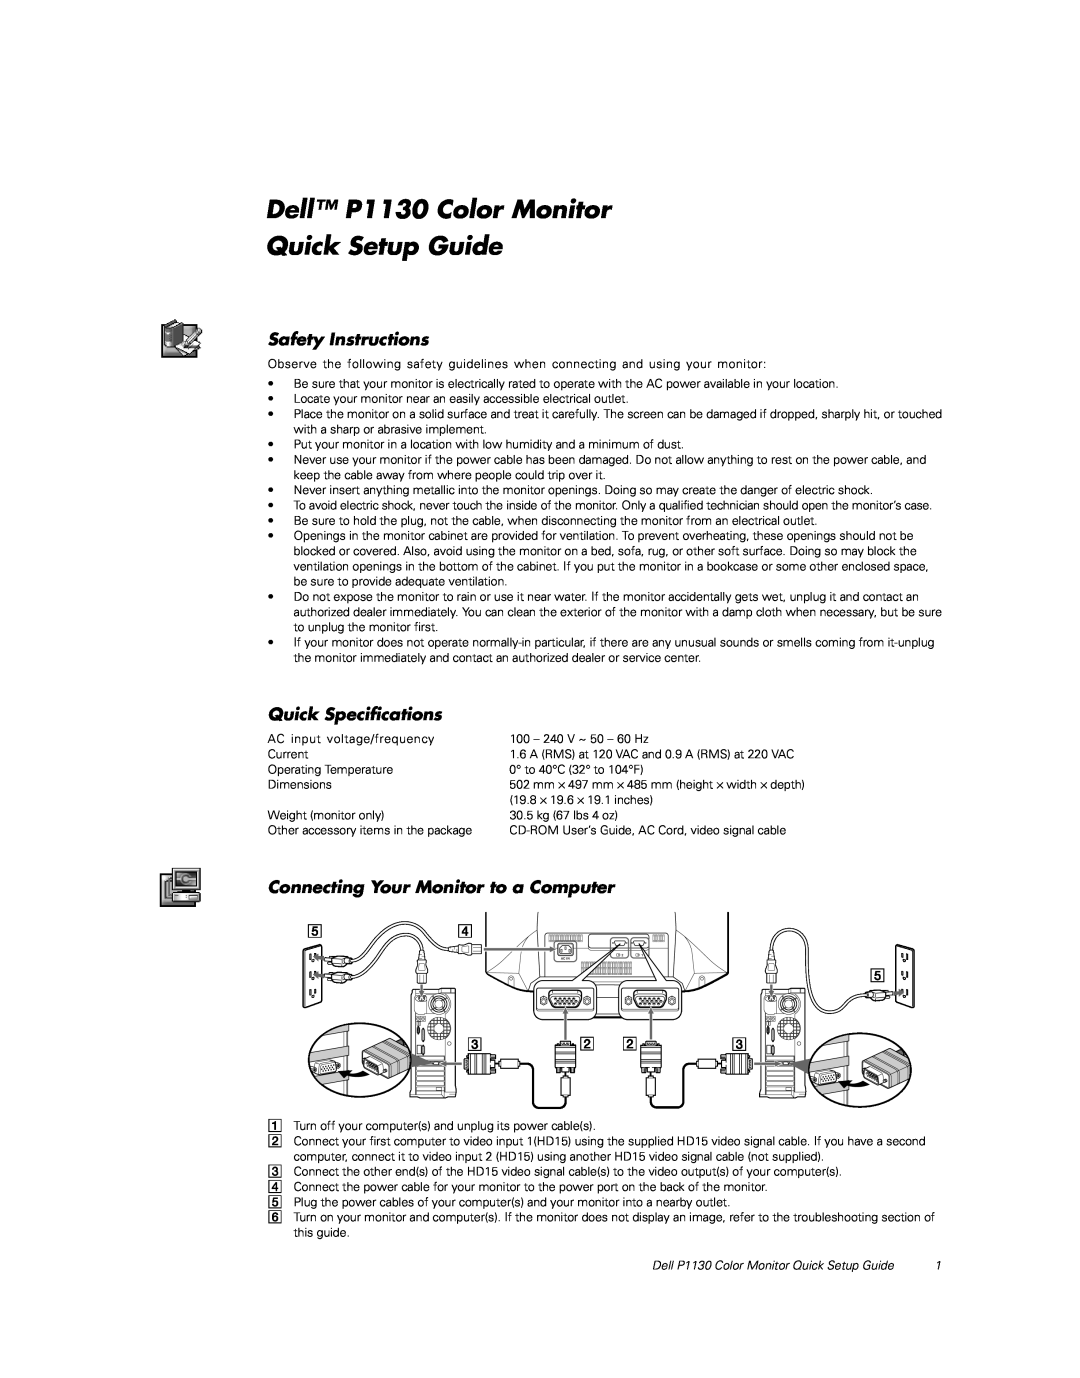 Dell P1130 specifications Safety Instructions, Quick Specifications, Connecting Your Monitor to a Computer 